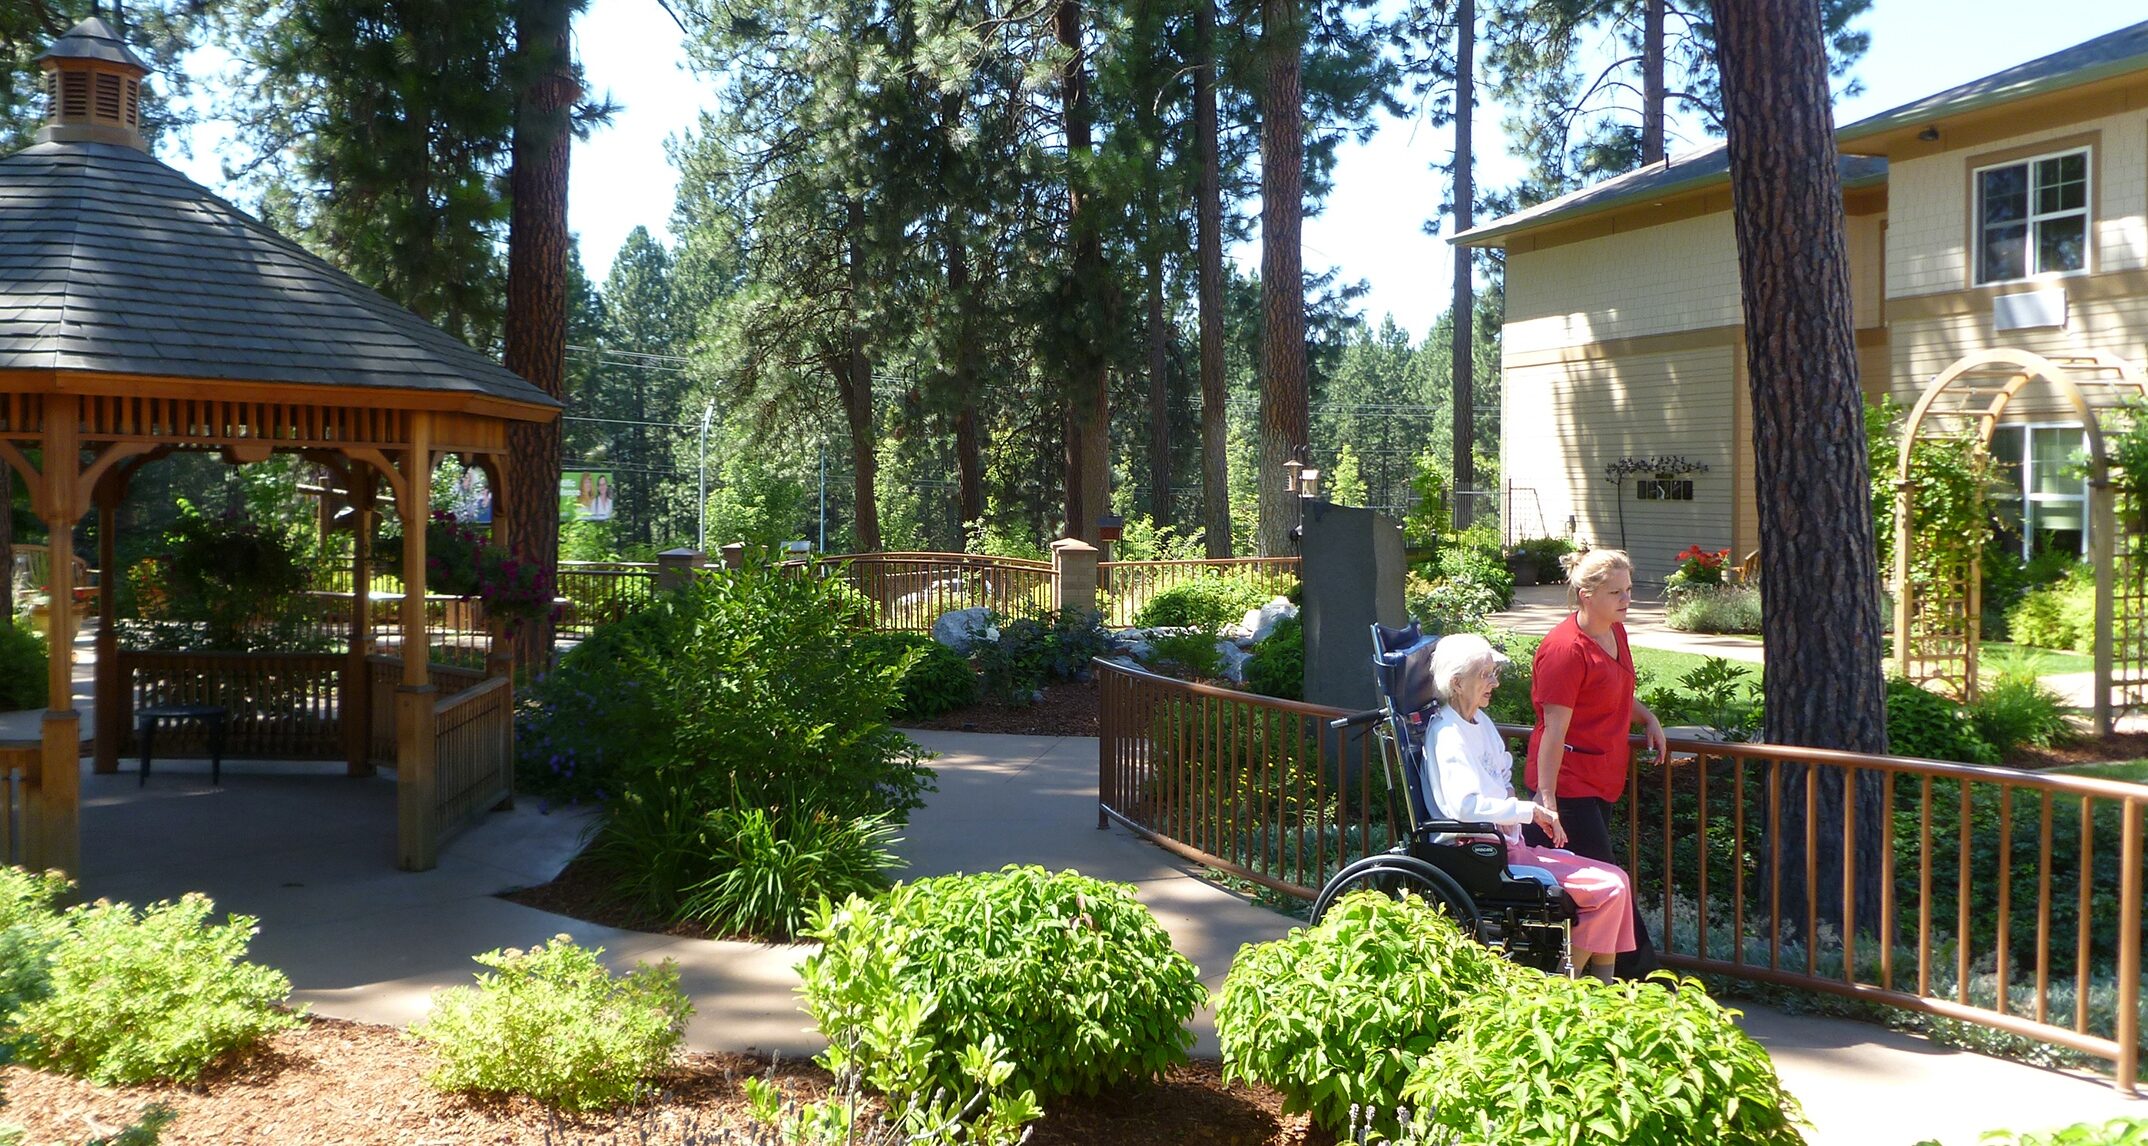 A successful memory care garden should feature an appropriate
balance of hardscape and vegetation that provides opportunities for movement,
encourages social interaction, and engages the senses. The Village at Orchard
Ridge Serenity Garden; image courtesy of SPVV Landscape Architects